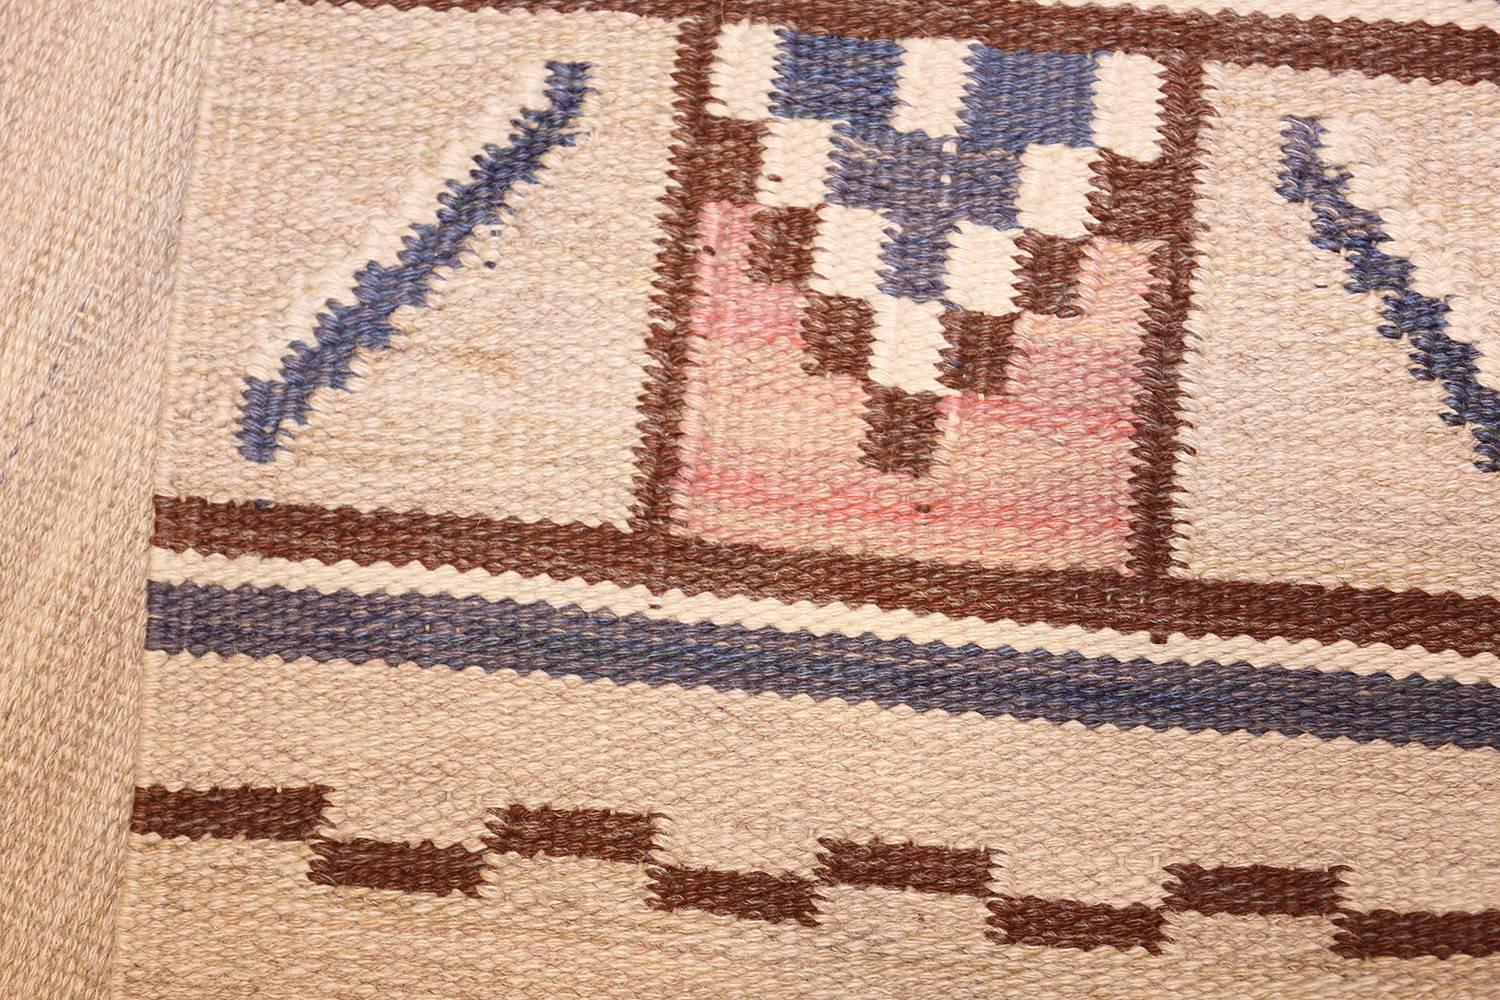 Hand-Woven Vintage Swedish Kilim Rug by Ellen Stahlbrand. Size: 3 ft 6 in x 5 ft 9 in 